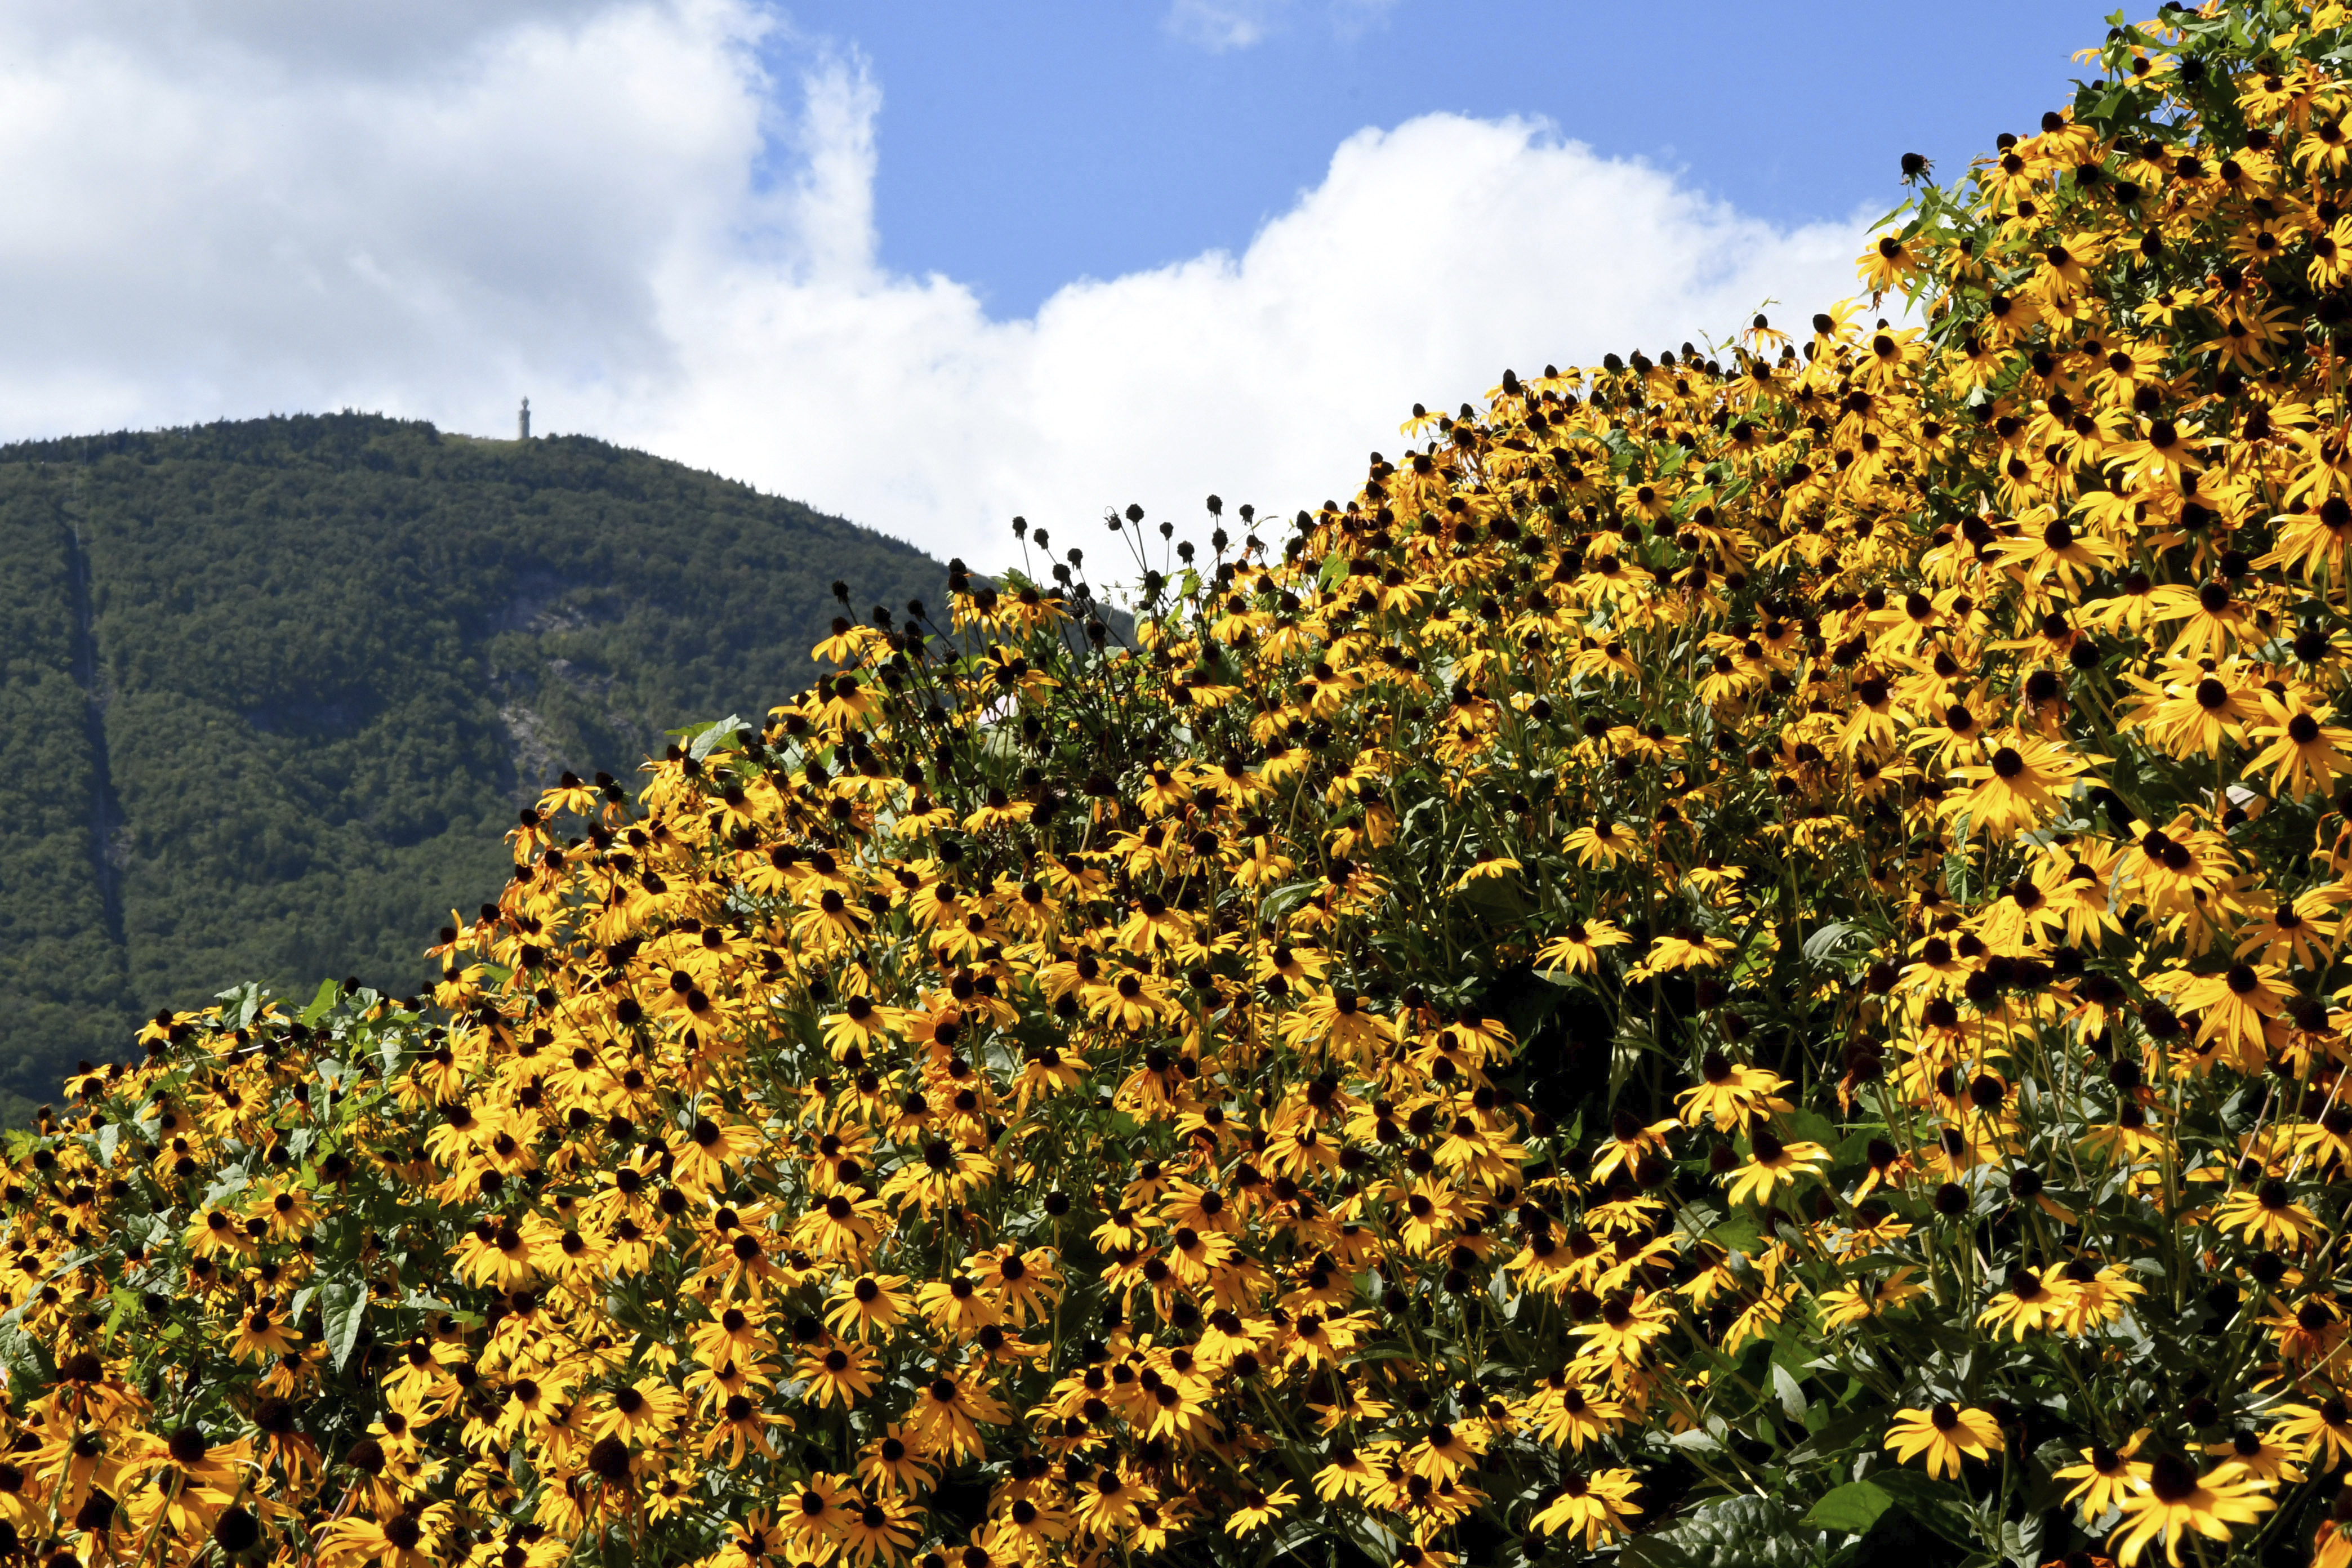 A hillside of black-eyed Susans colors the foreground while Mount Greylock, the highest peak in the state, rises from beyond at Jaeschke's Orchard in Adams, Mass. on Sunday, Sept. 6, 2020. (Gillian Jones/The Berkshire Eagle via AP)